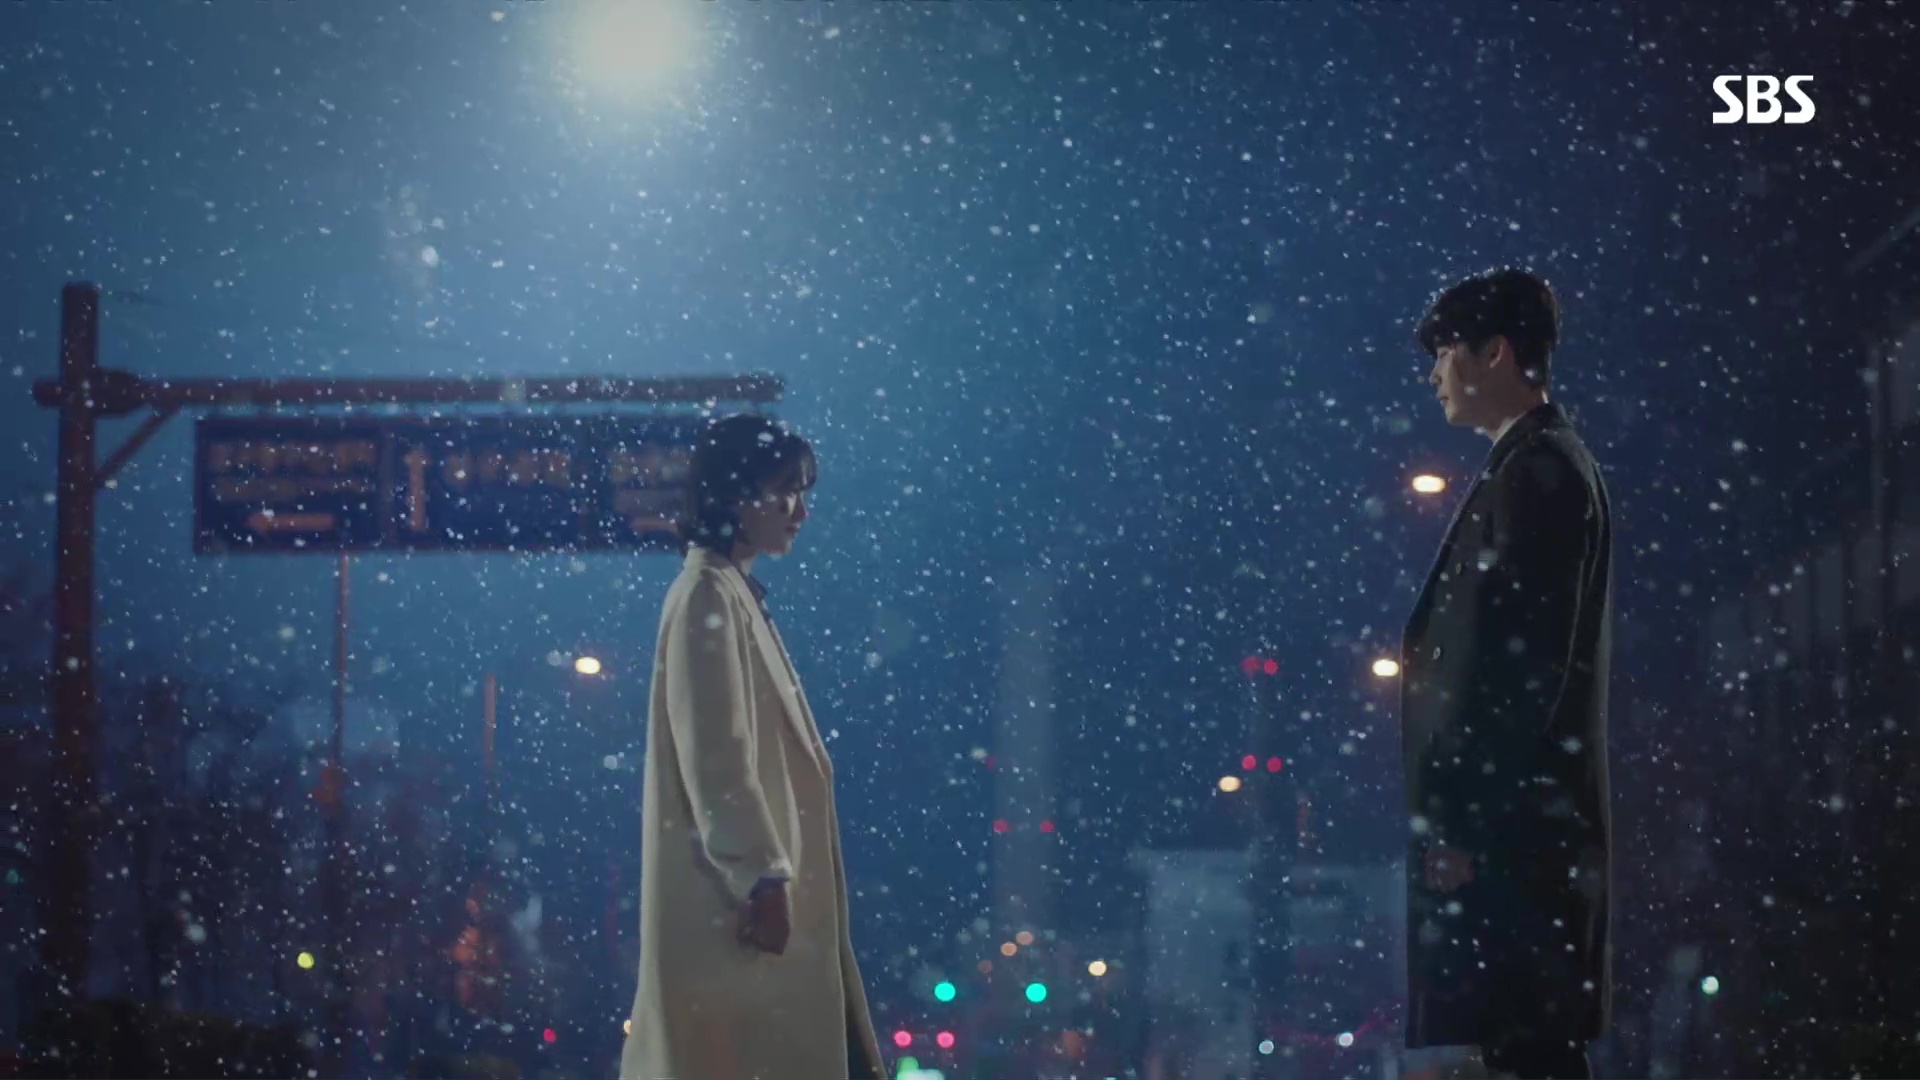 Good Ol’ Review: Cast and Characters Make “While You Were Sleeping” a Worthwhile Series